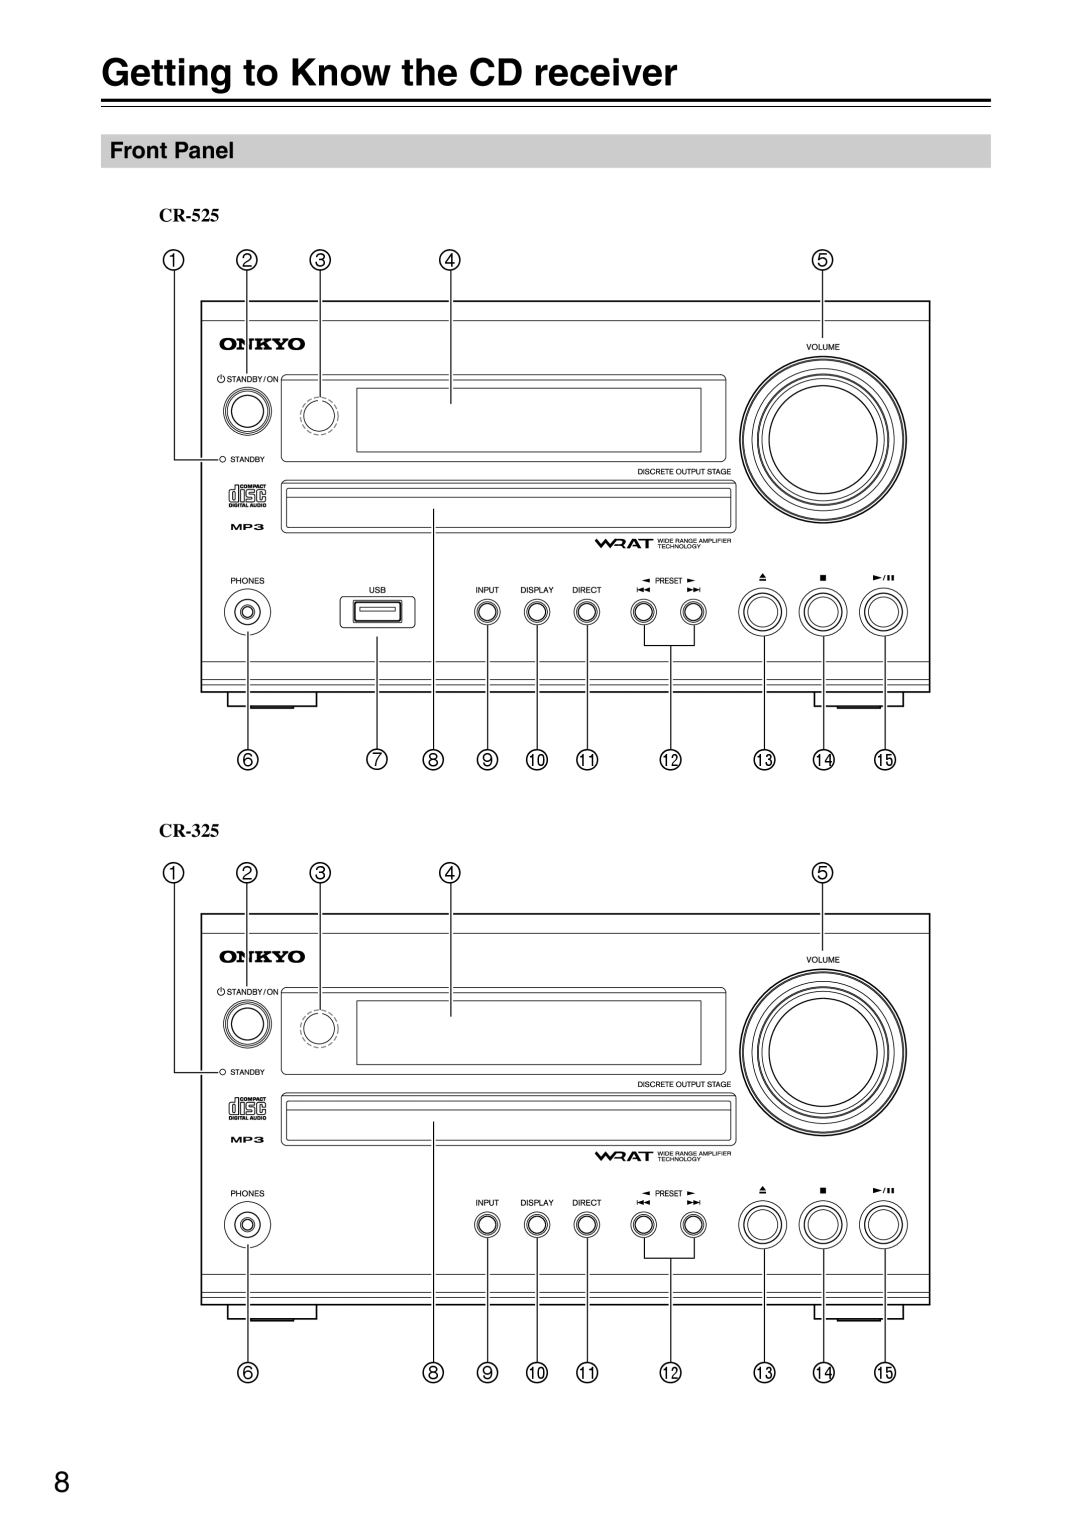 Onkyo CR-325 instruction manual Getting to Know the CD receiver, Front Panel, CR-525 